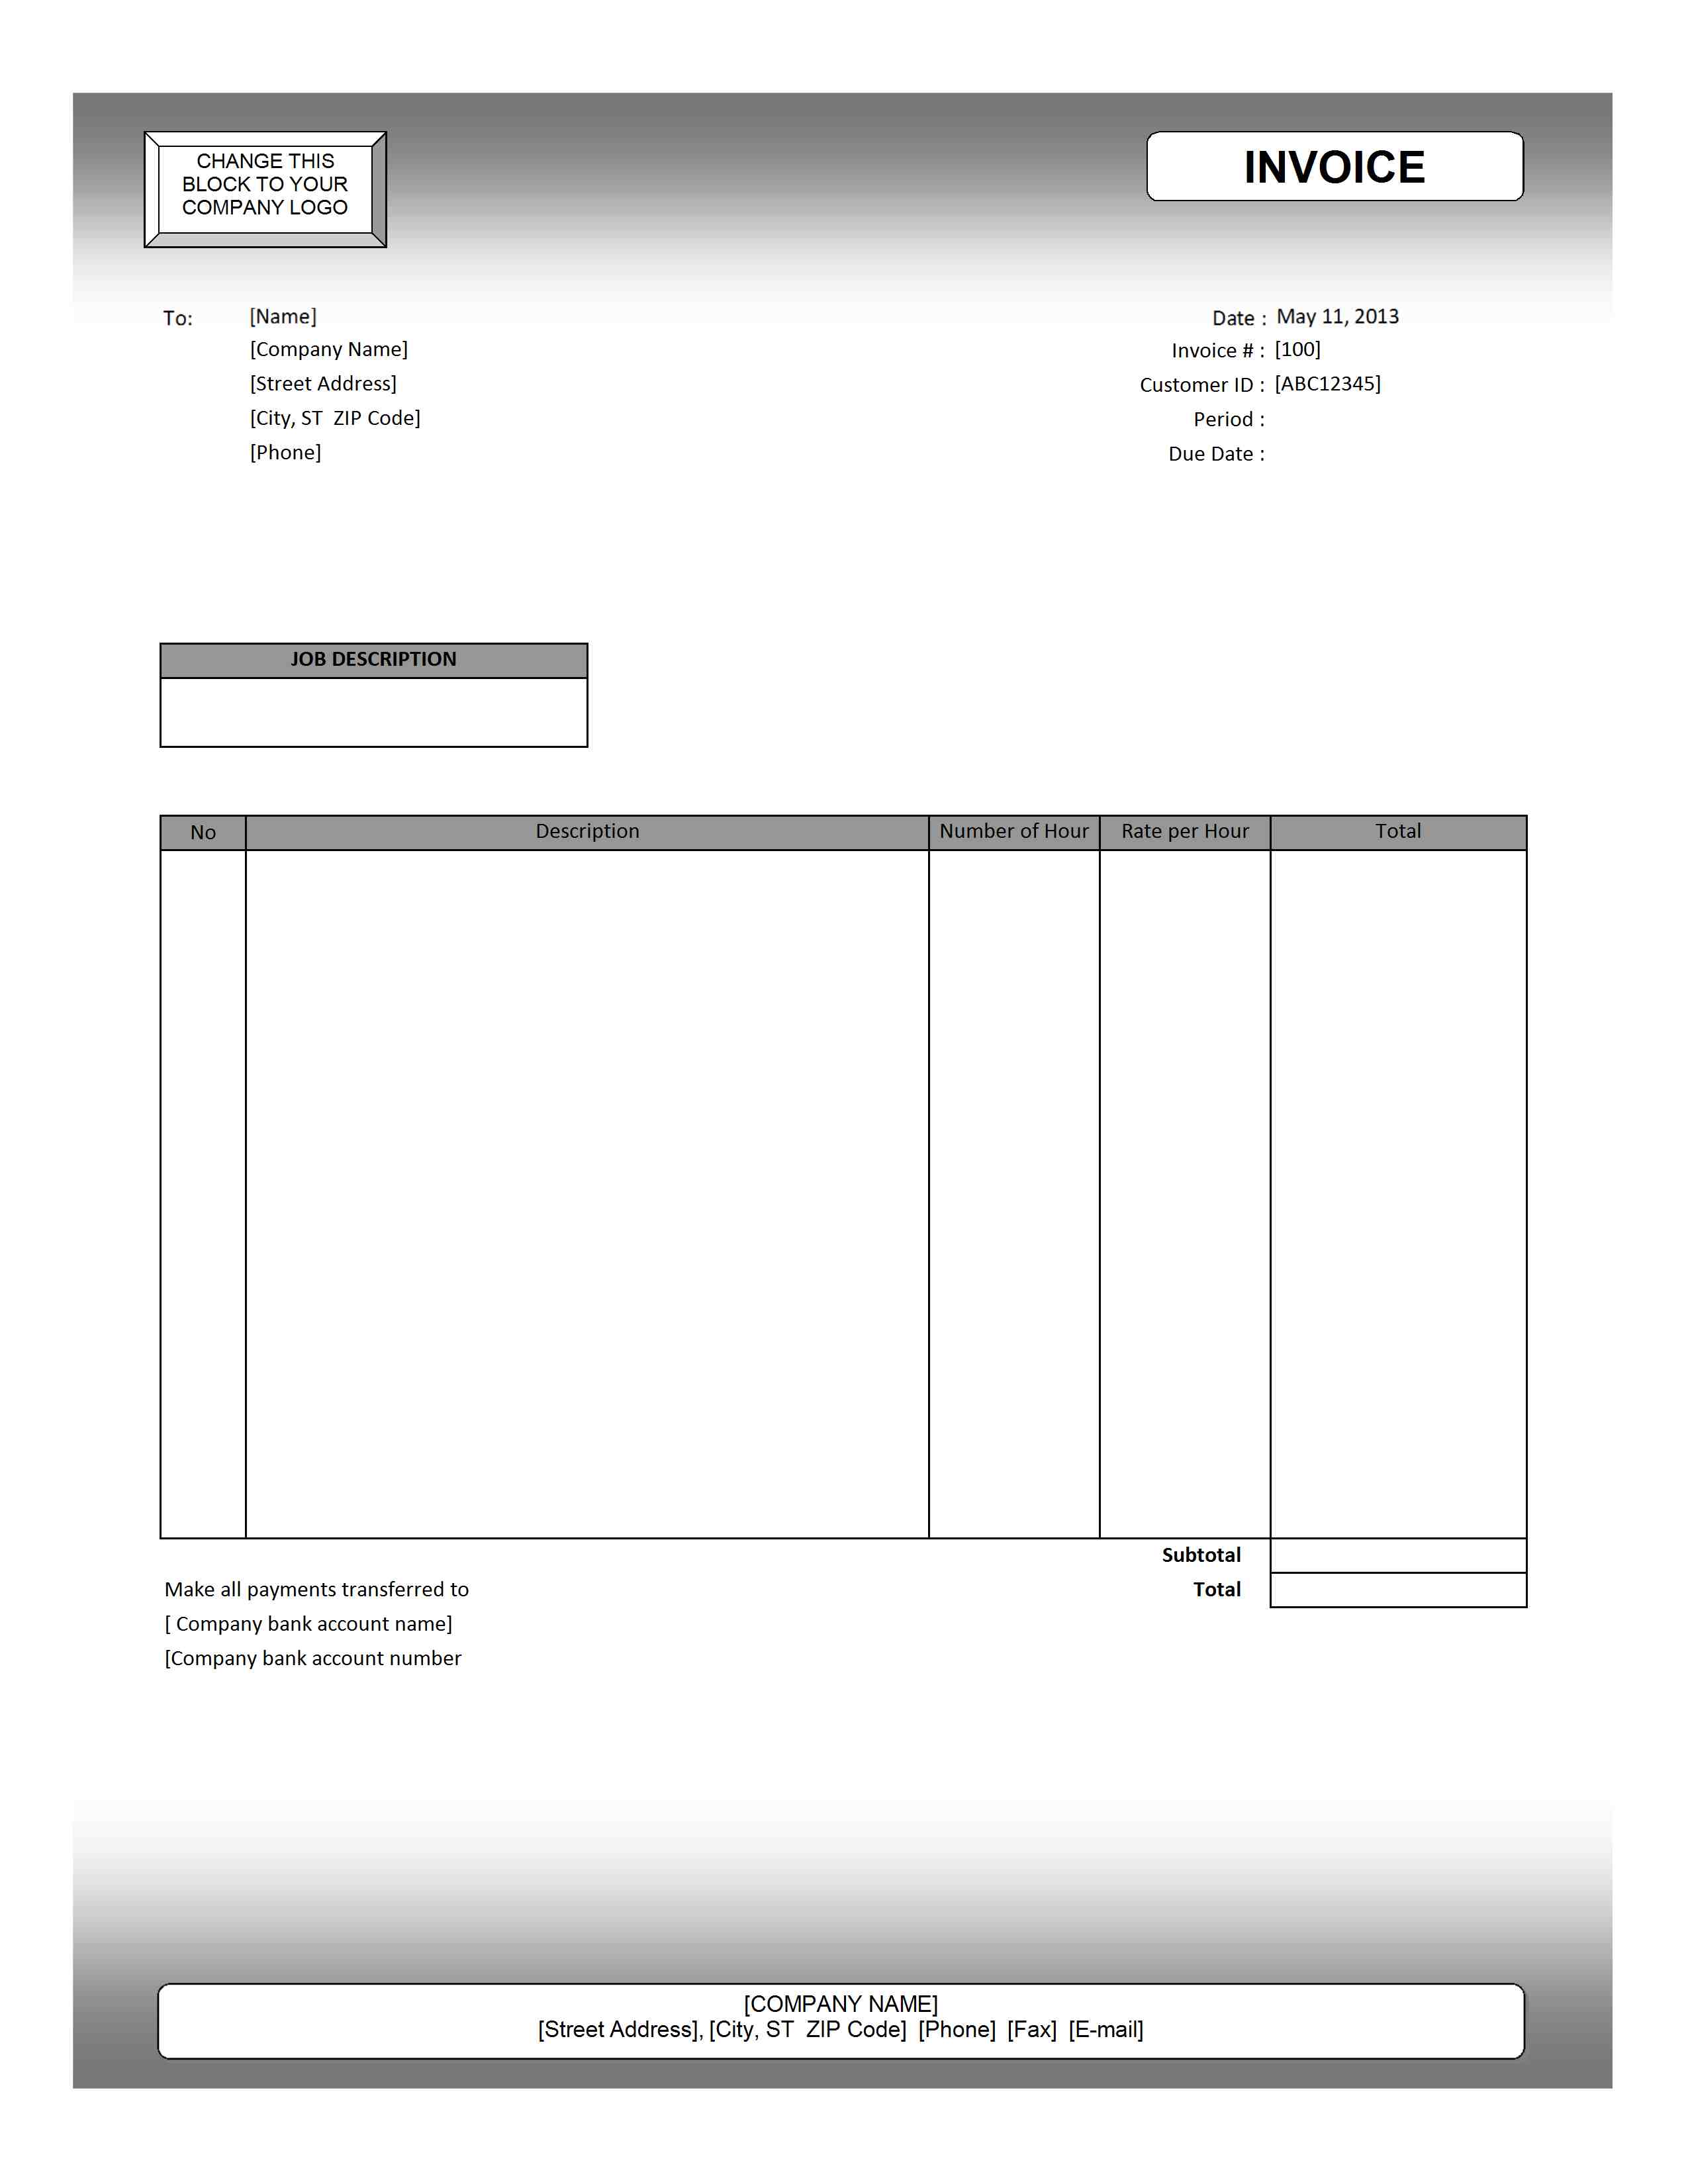 invoice excel form